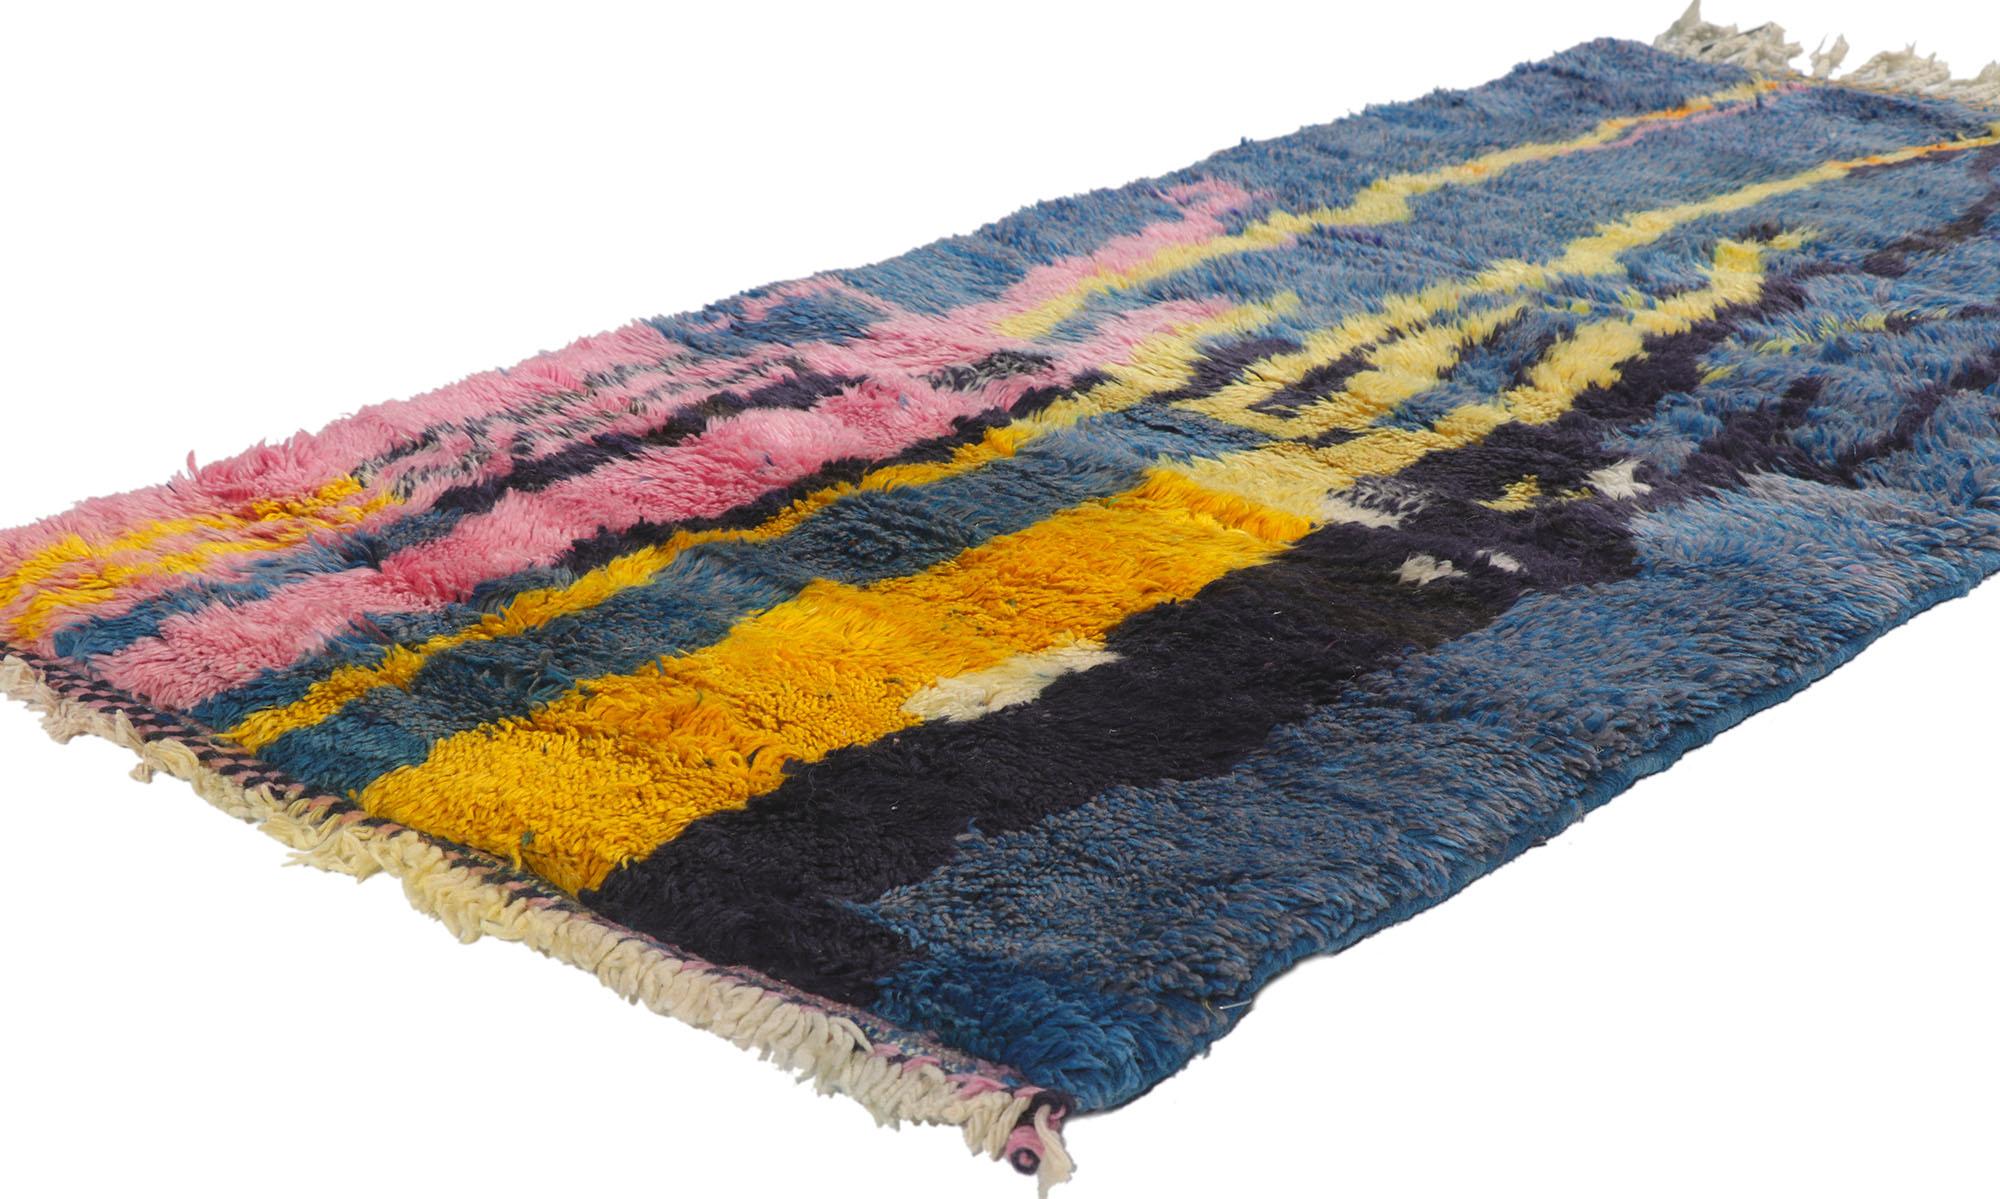 21133 New Colorful Abstract Berber Moroccan rug 02'08 x 05'04. Showcasing an expressive design, incredible detail and texture, this hand knotted wool colorful Berber Moroccan rug is a captivating vision of woven beauty. The bold geometric pattern